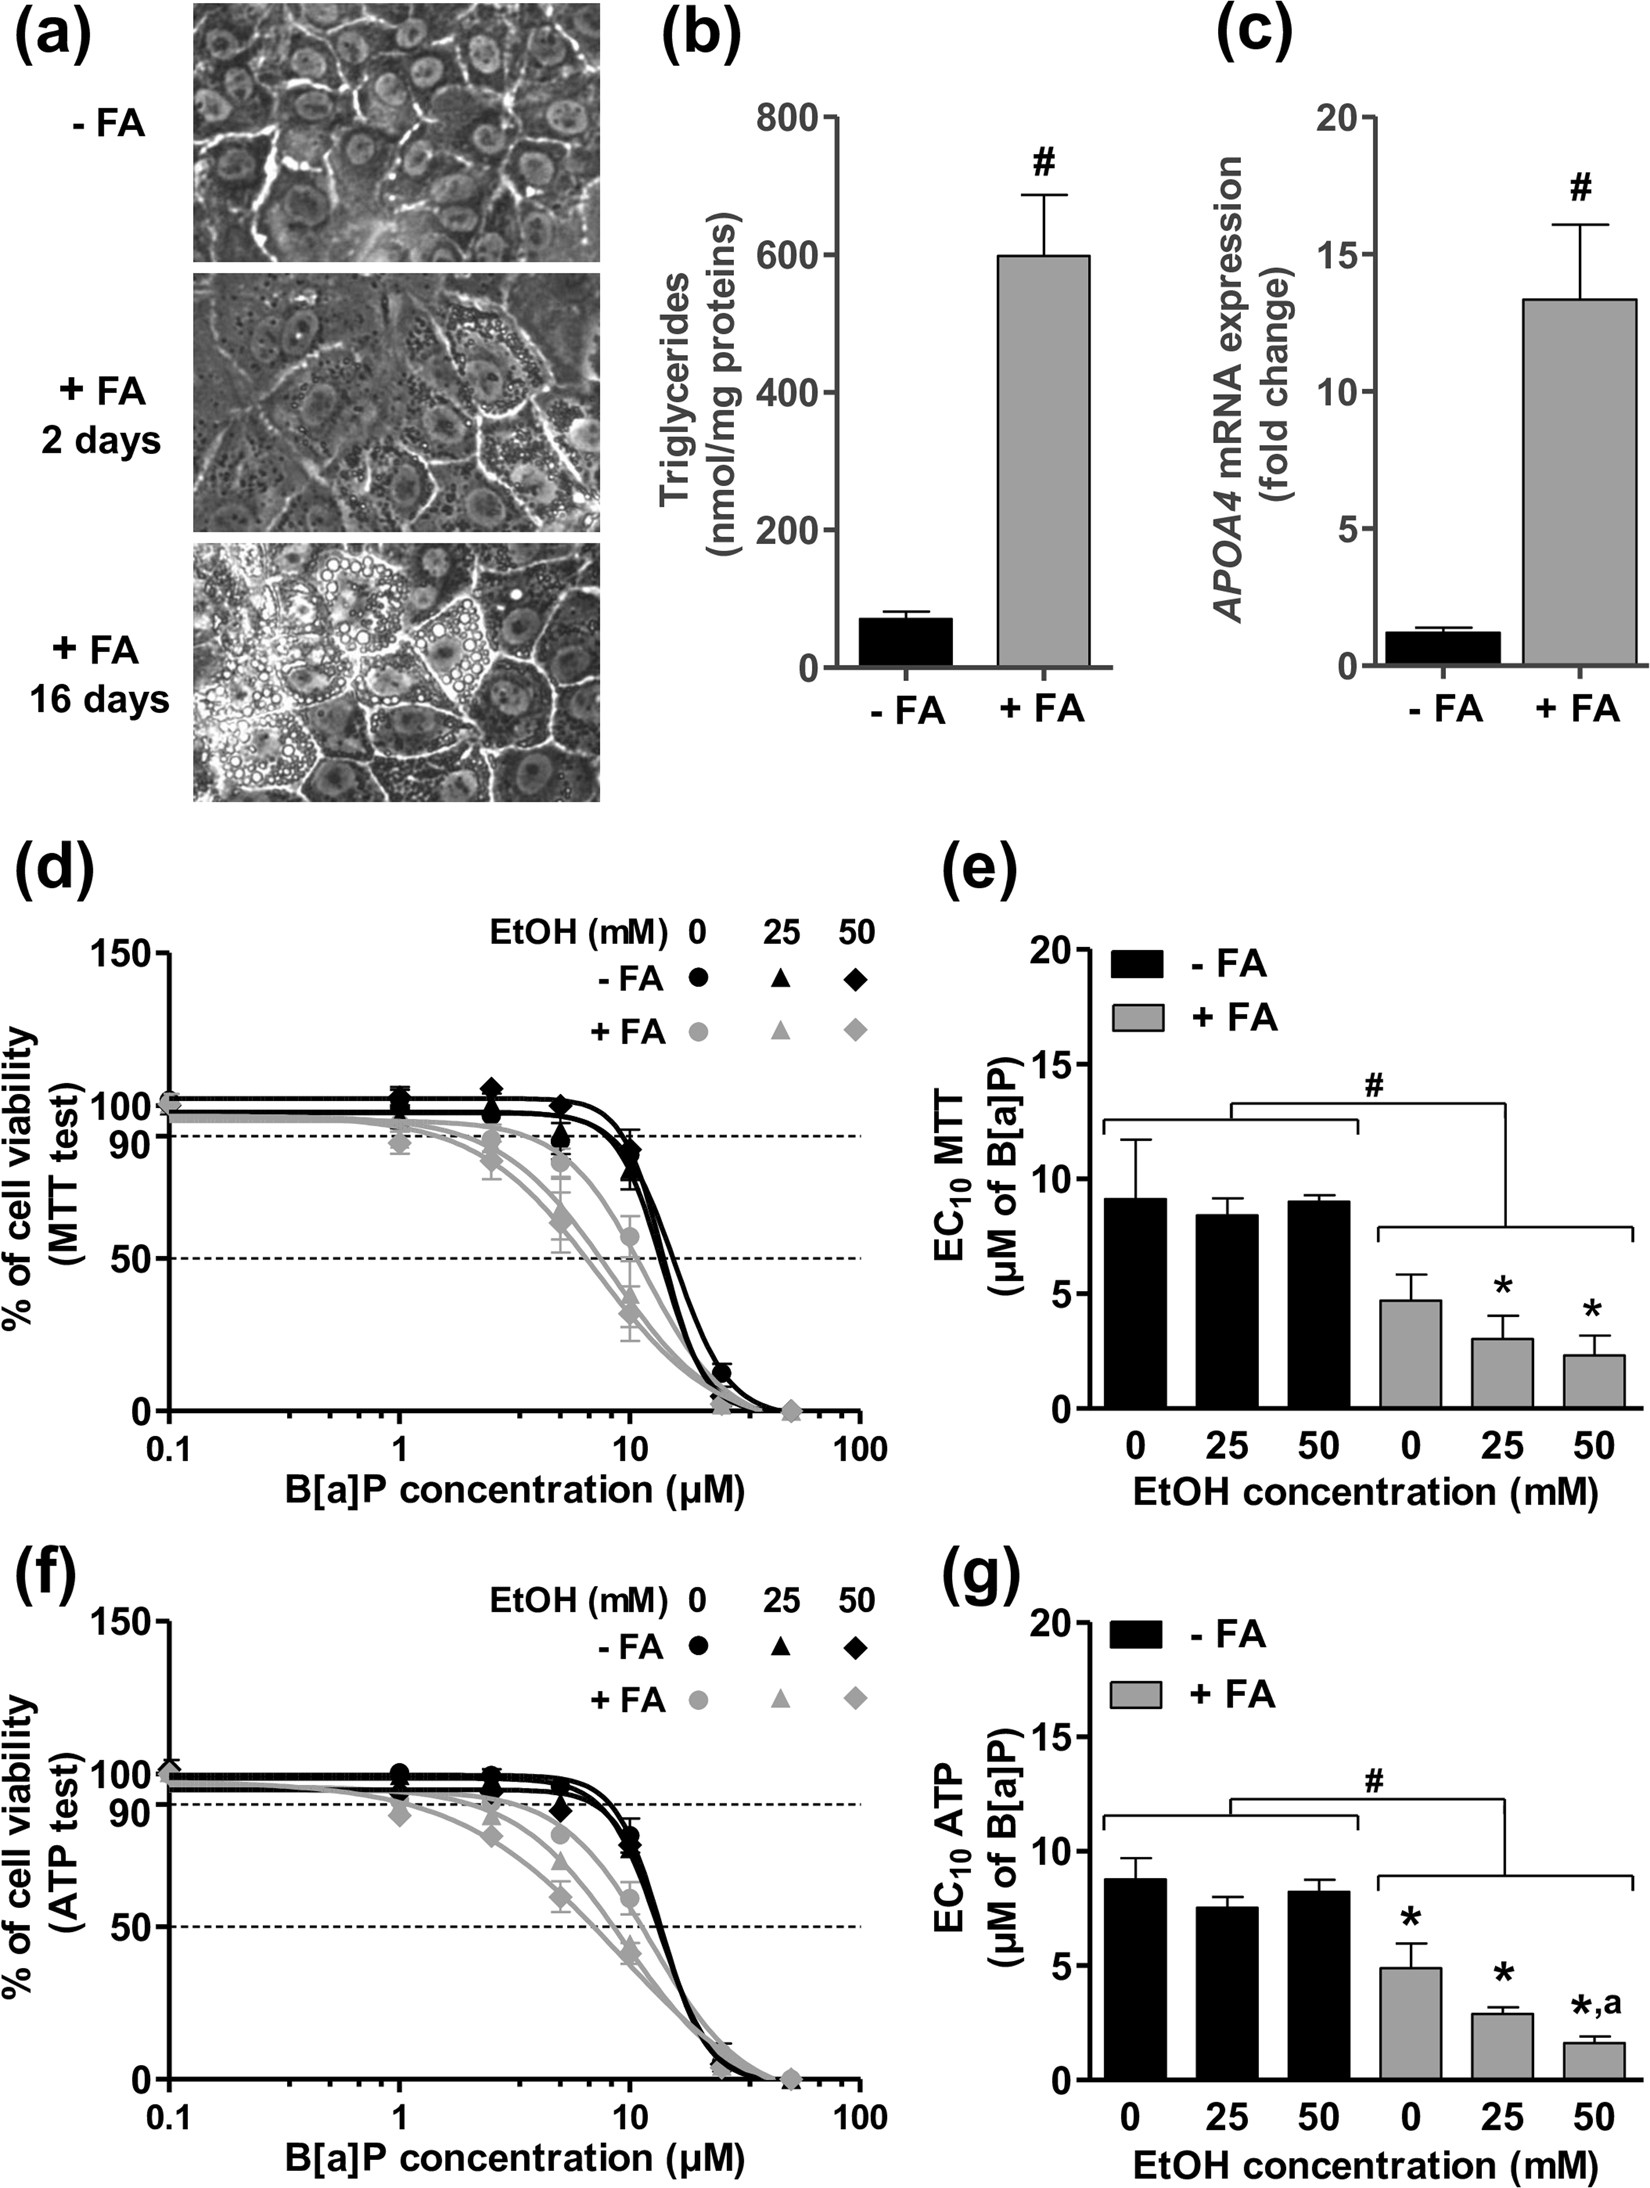 Co-exposure to benzo[a]pyrene and ethanol induces a pathological  progression of liver steatosis in vitro and in vivo | Scientific Reports